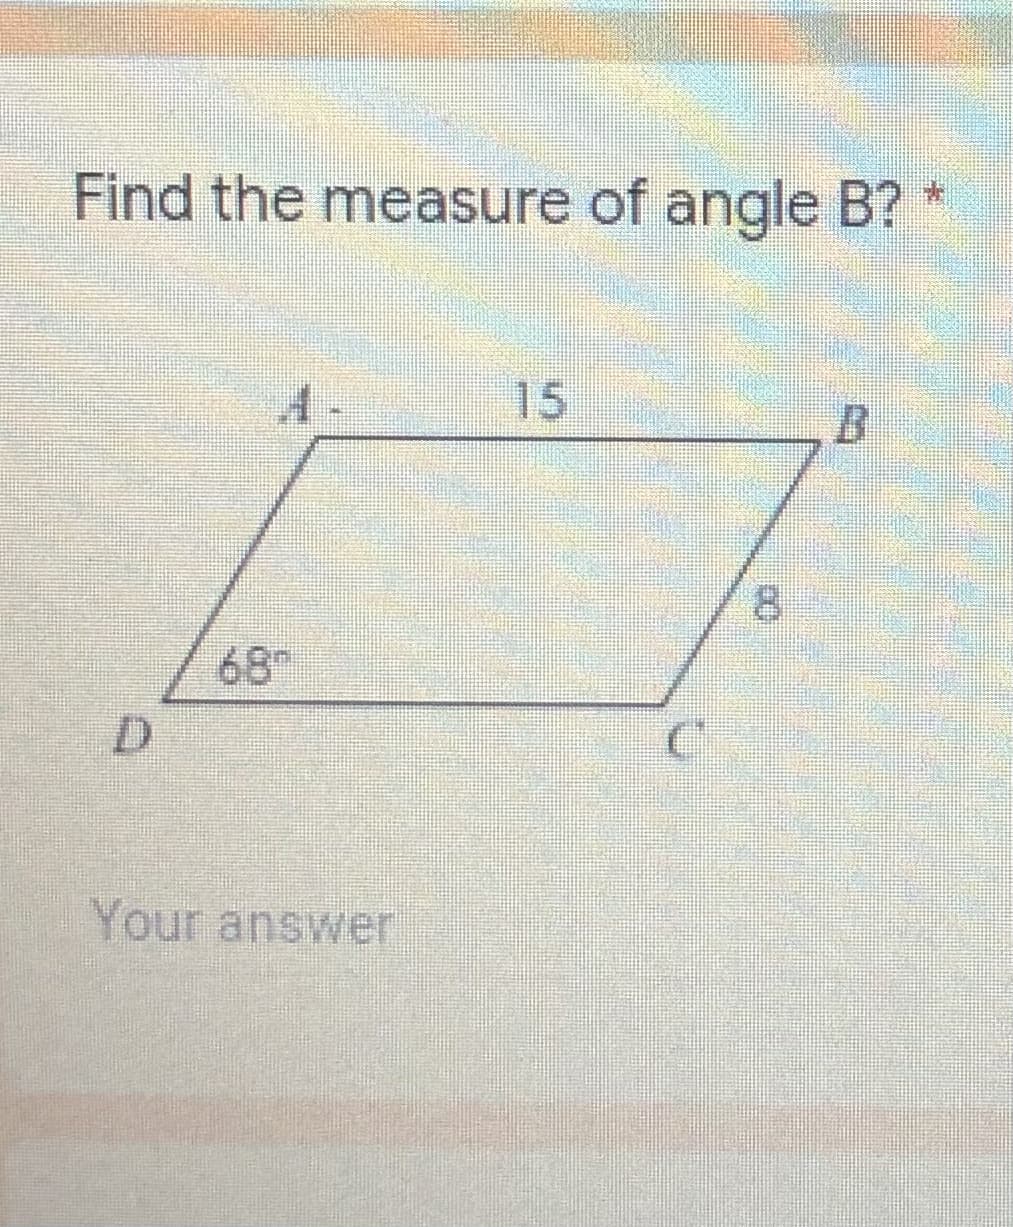 Find the measure of angle B?
A-
15
8.
68
D.
Your answer
